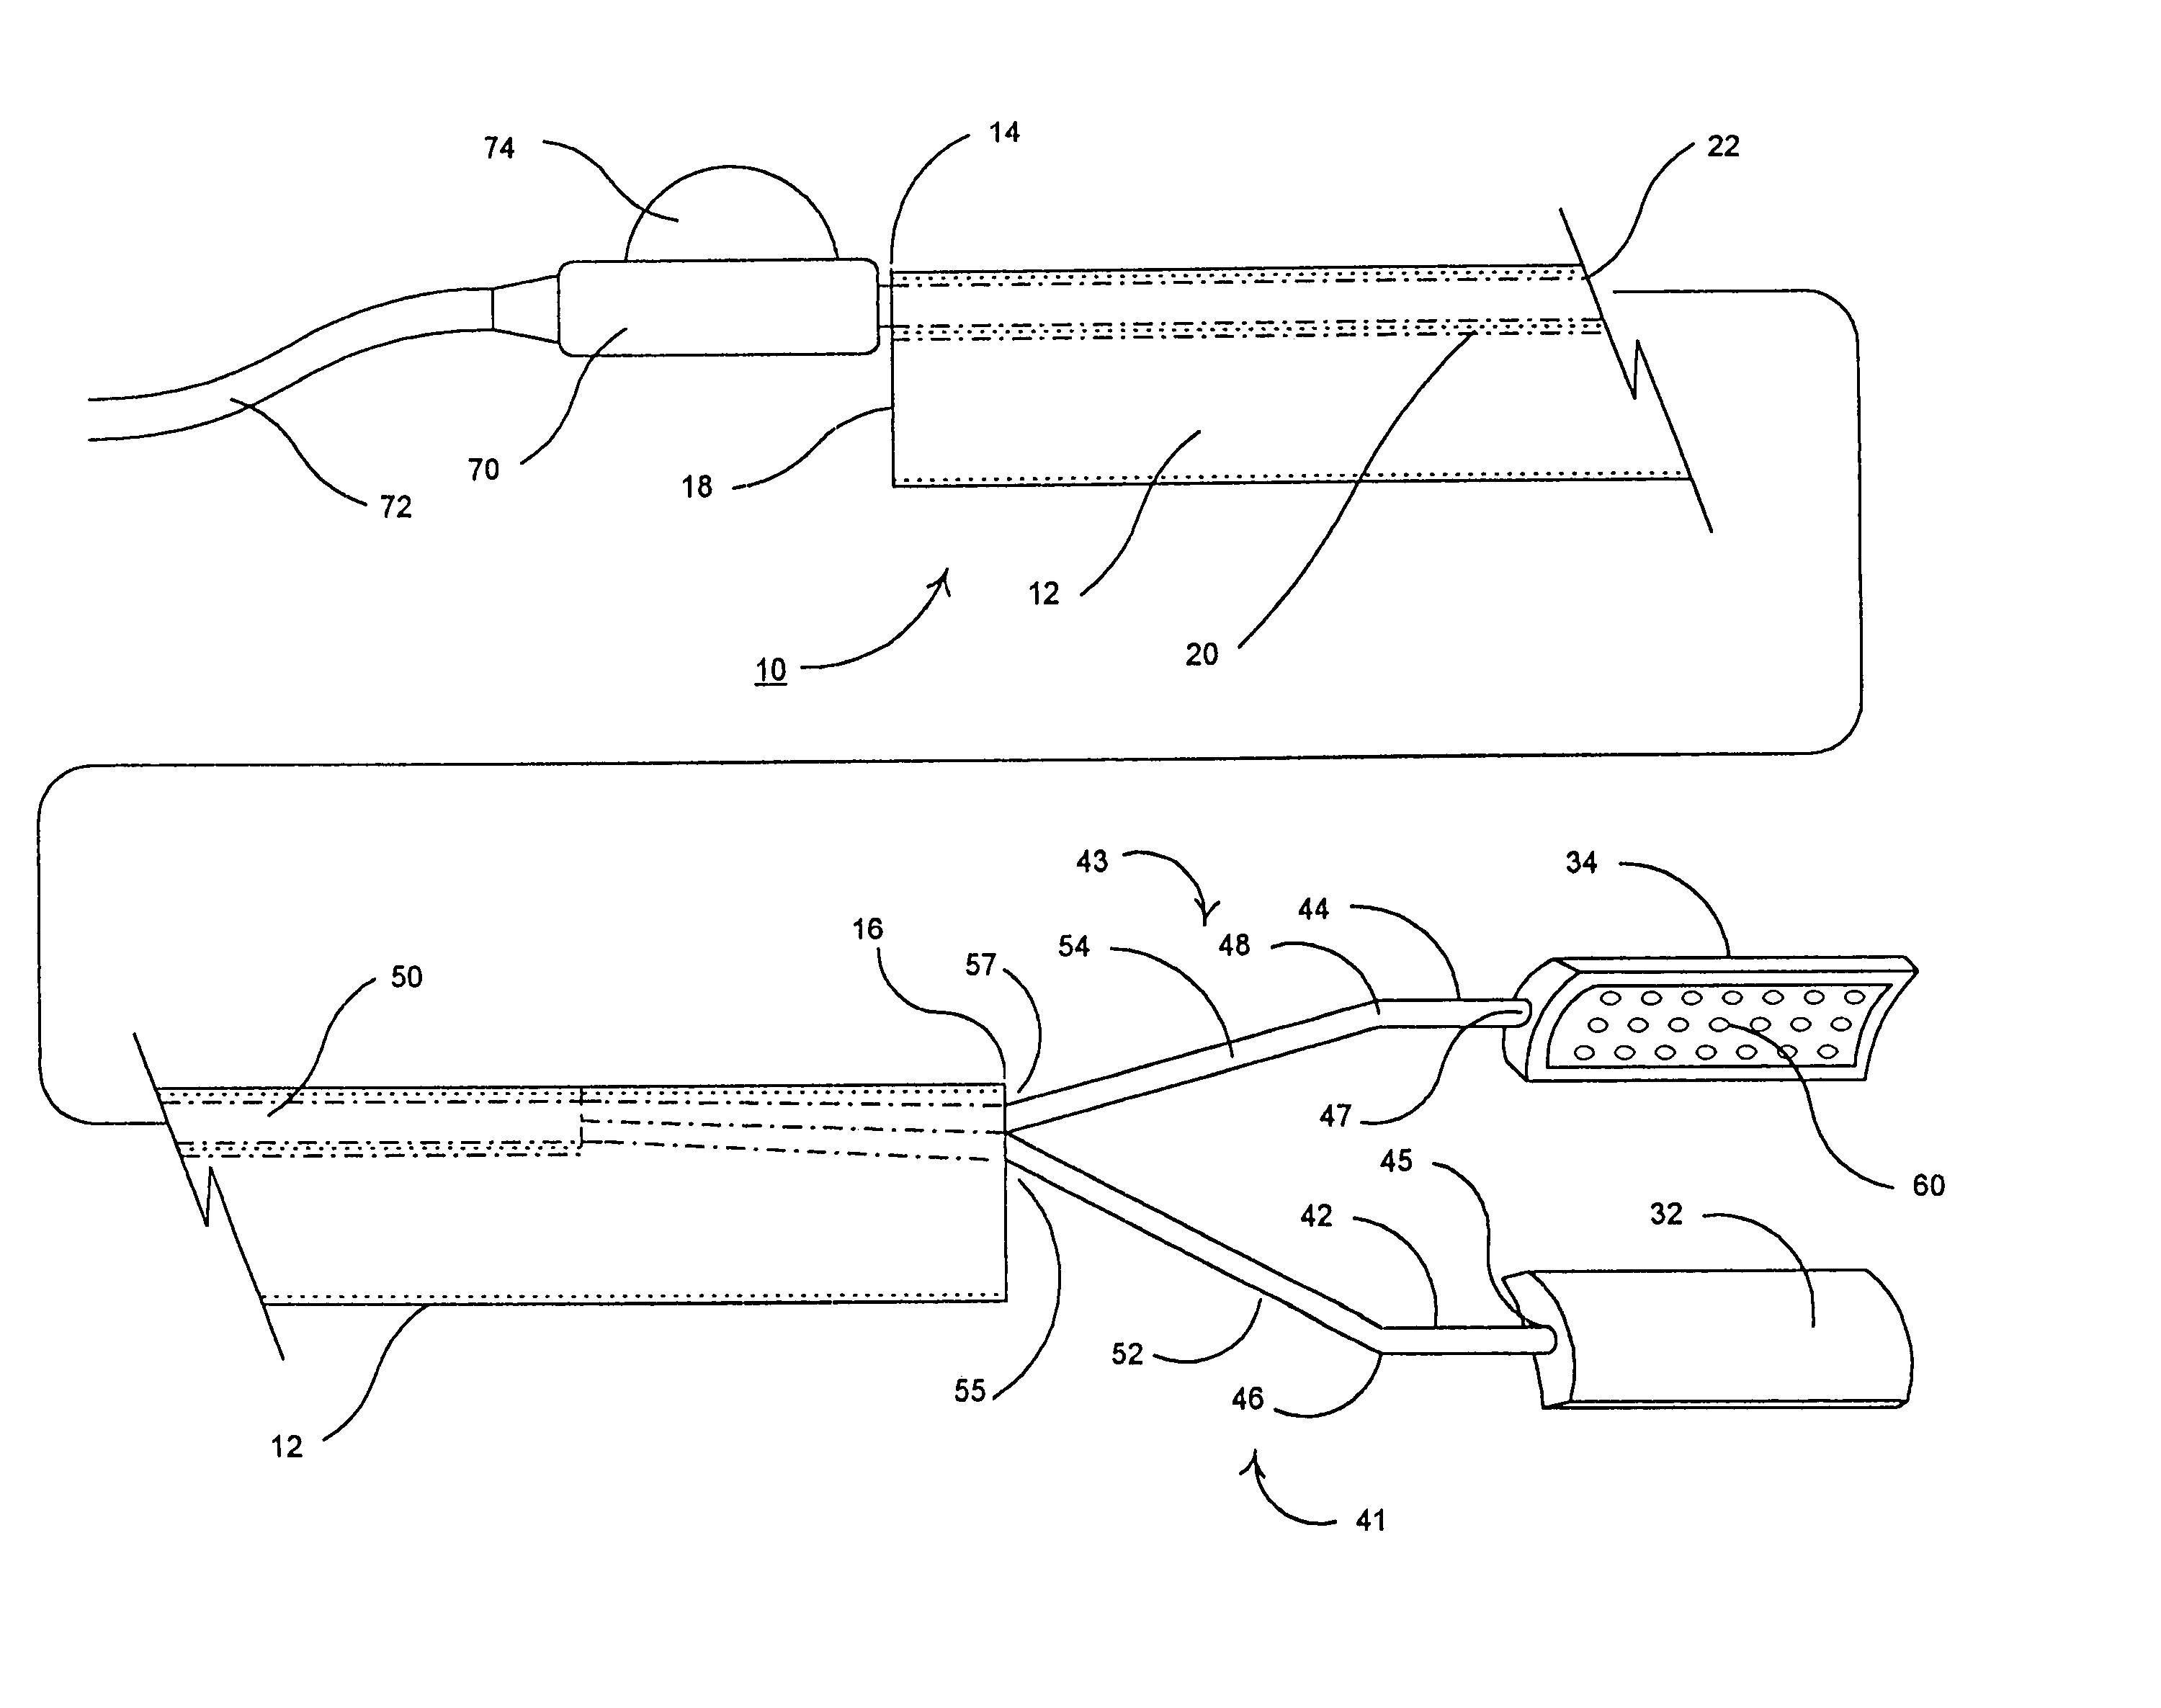 Methods and tools for accessing an anatomic space